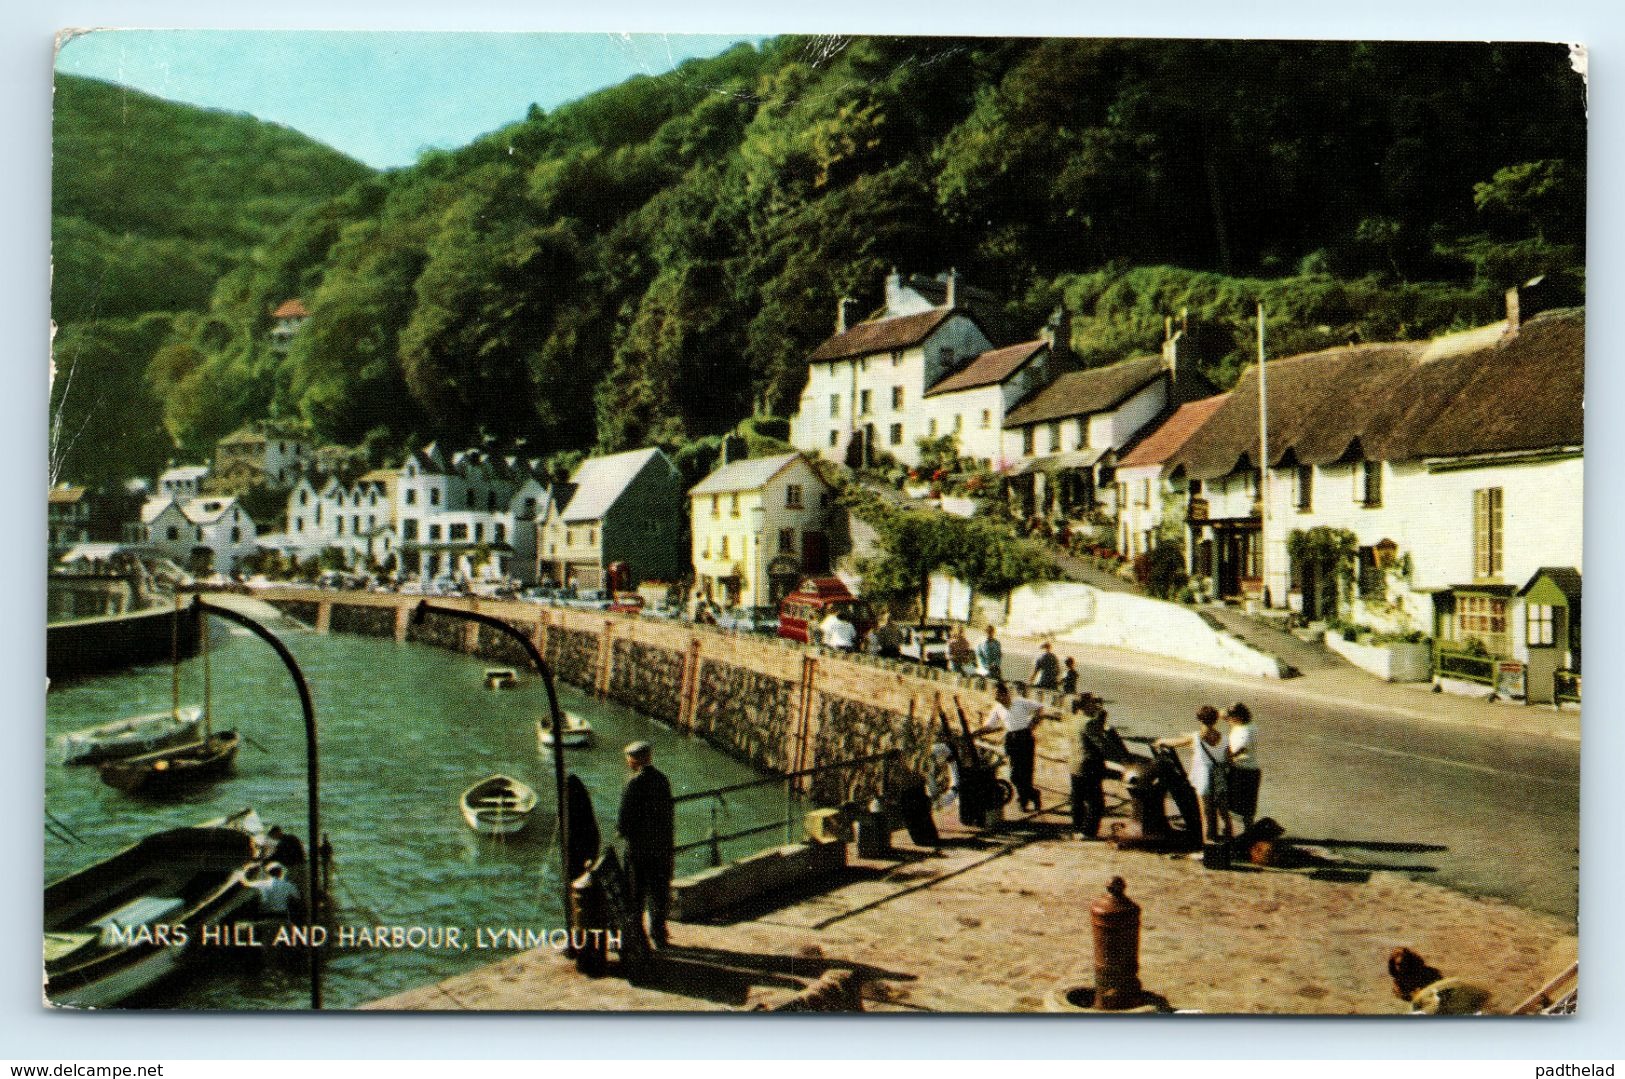 POSTCARD MARS HILL AND HARBOUR LYNMOUTH COLOUR POSTCARD RPPC  1962 BIRKENHEAD ADDRESS - Lynmouth & Lynton